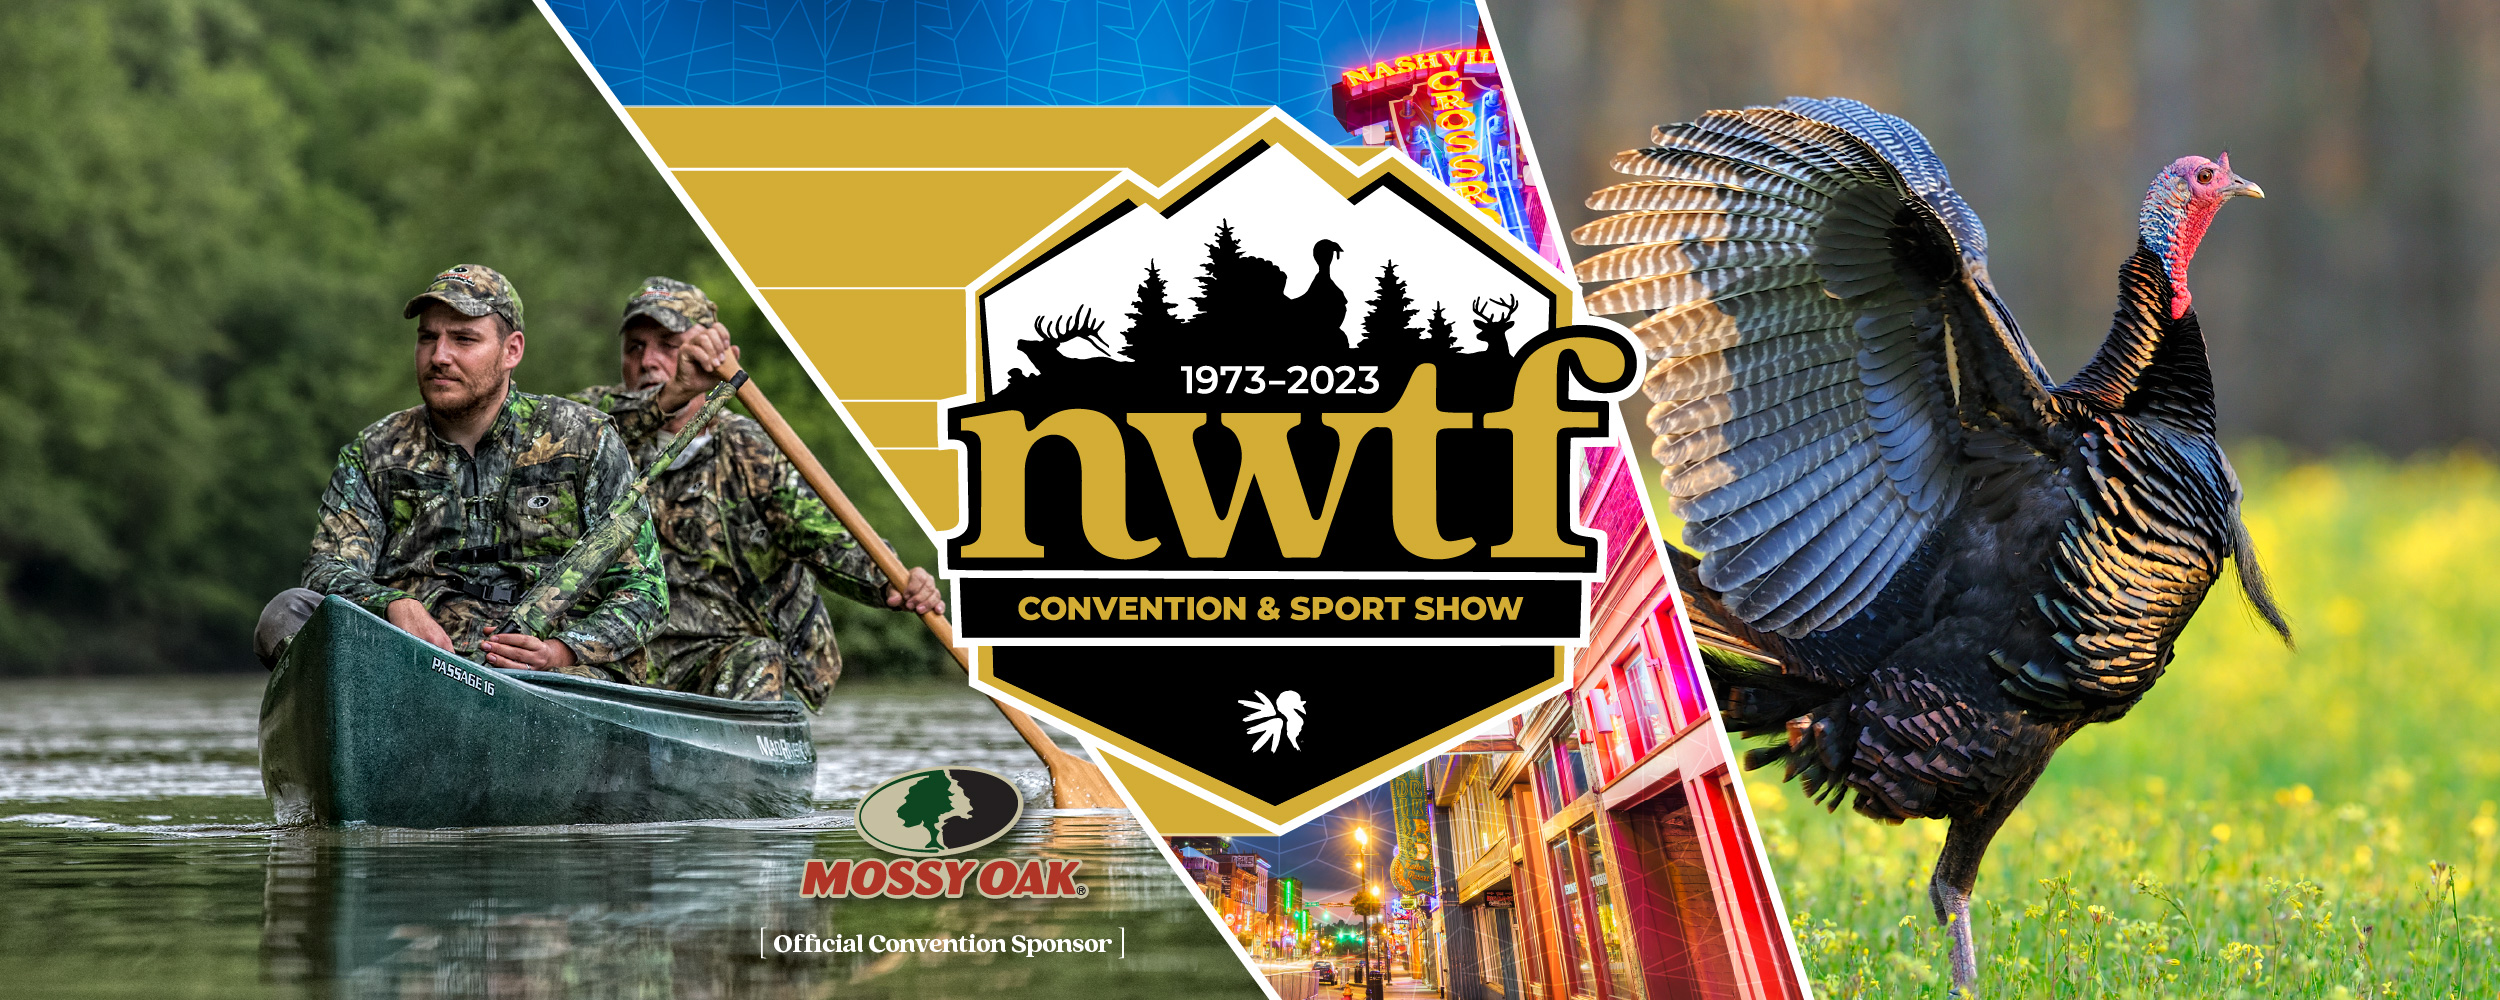 NWTF Convention The National Wild Turkey Federation